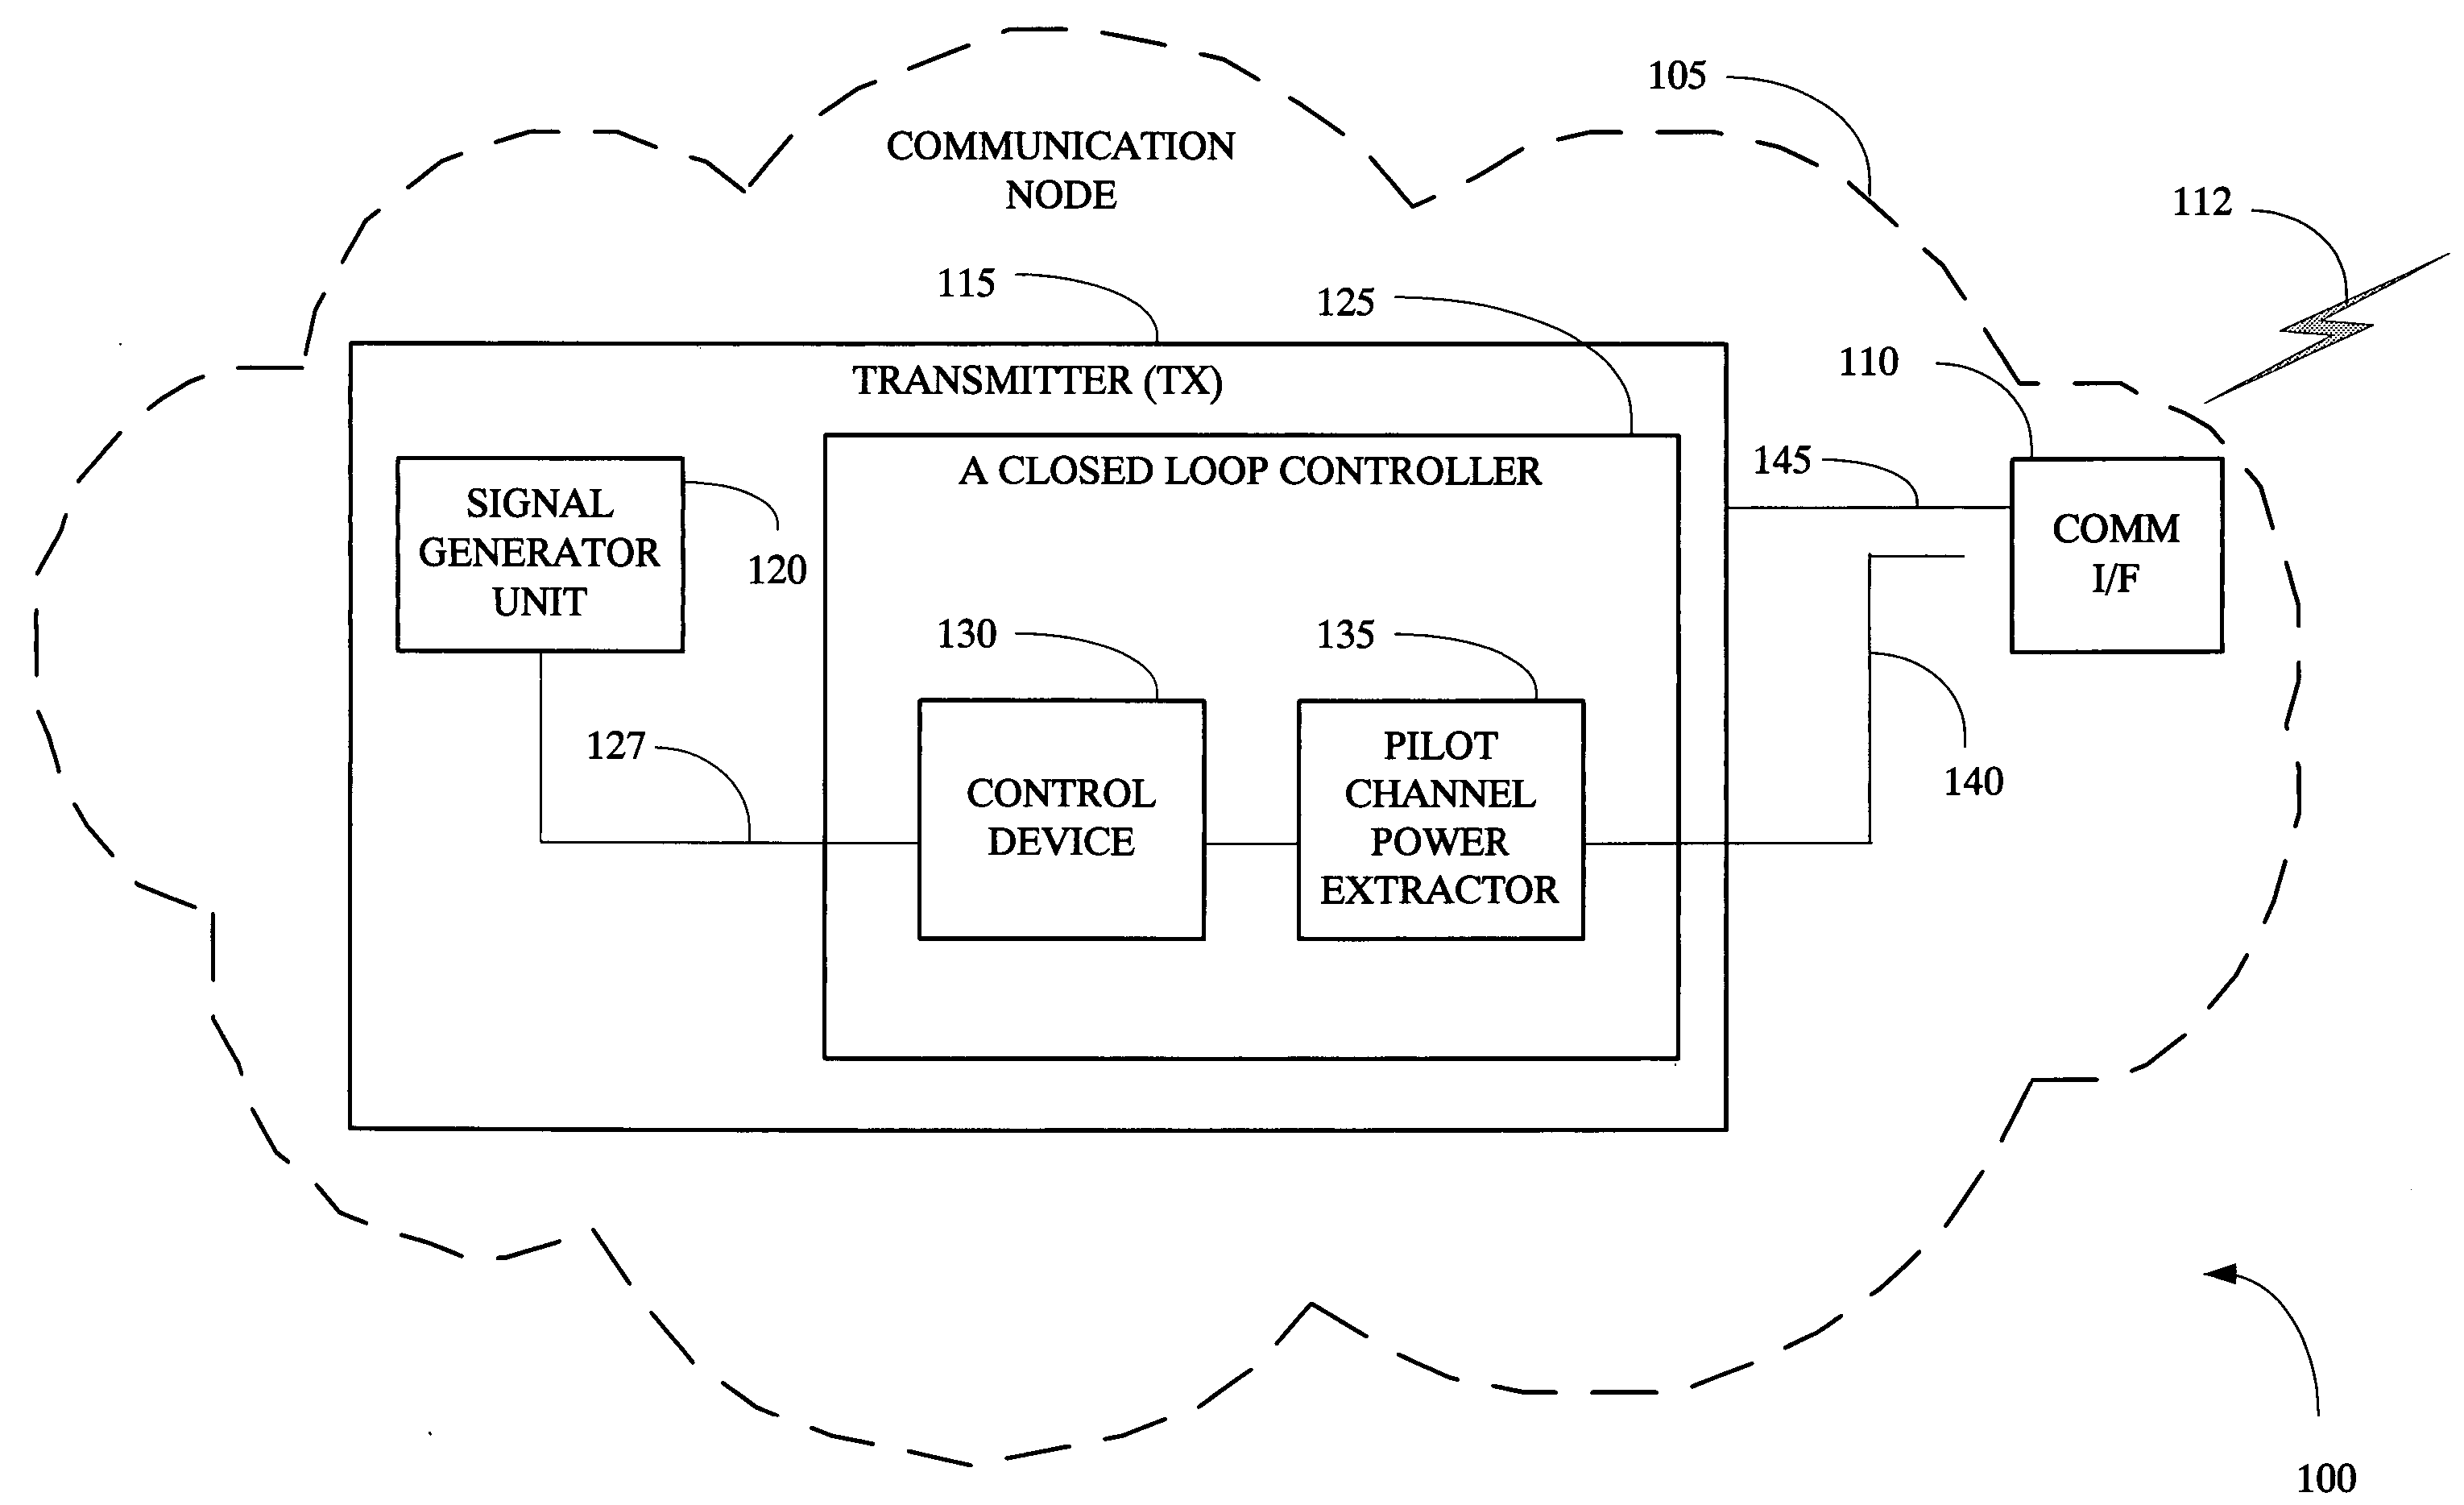 Using power of a pilot channel to control output power from a transmitter